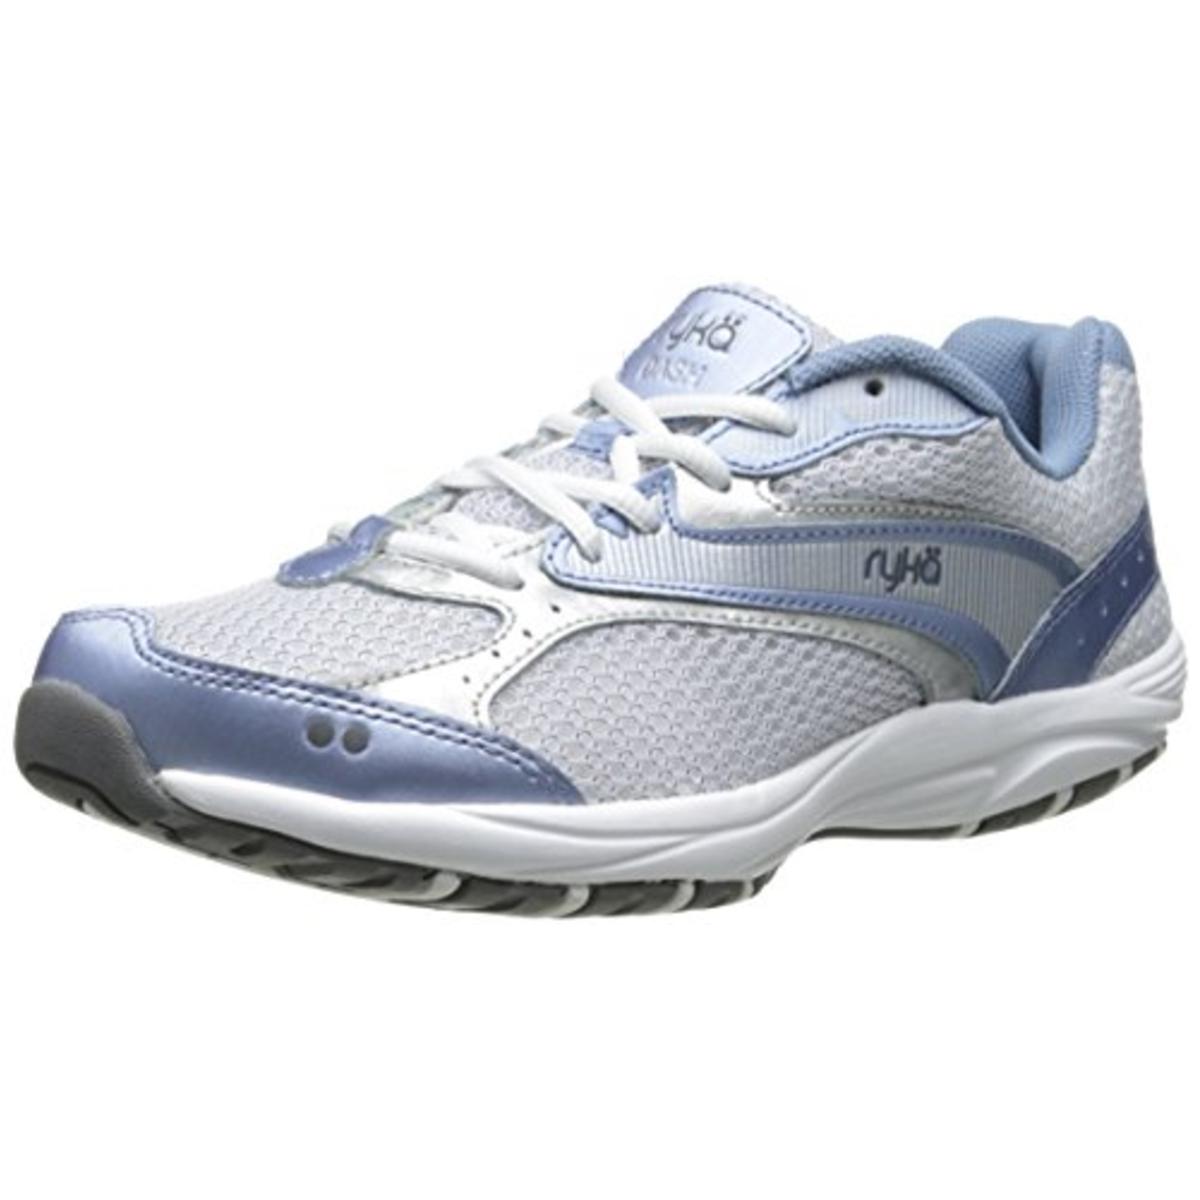 Ryka 8007 Womens Dash Leather Trim Light Weight Walking Shoes Athletic ...